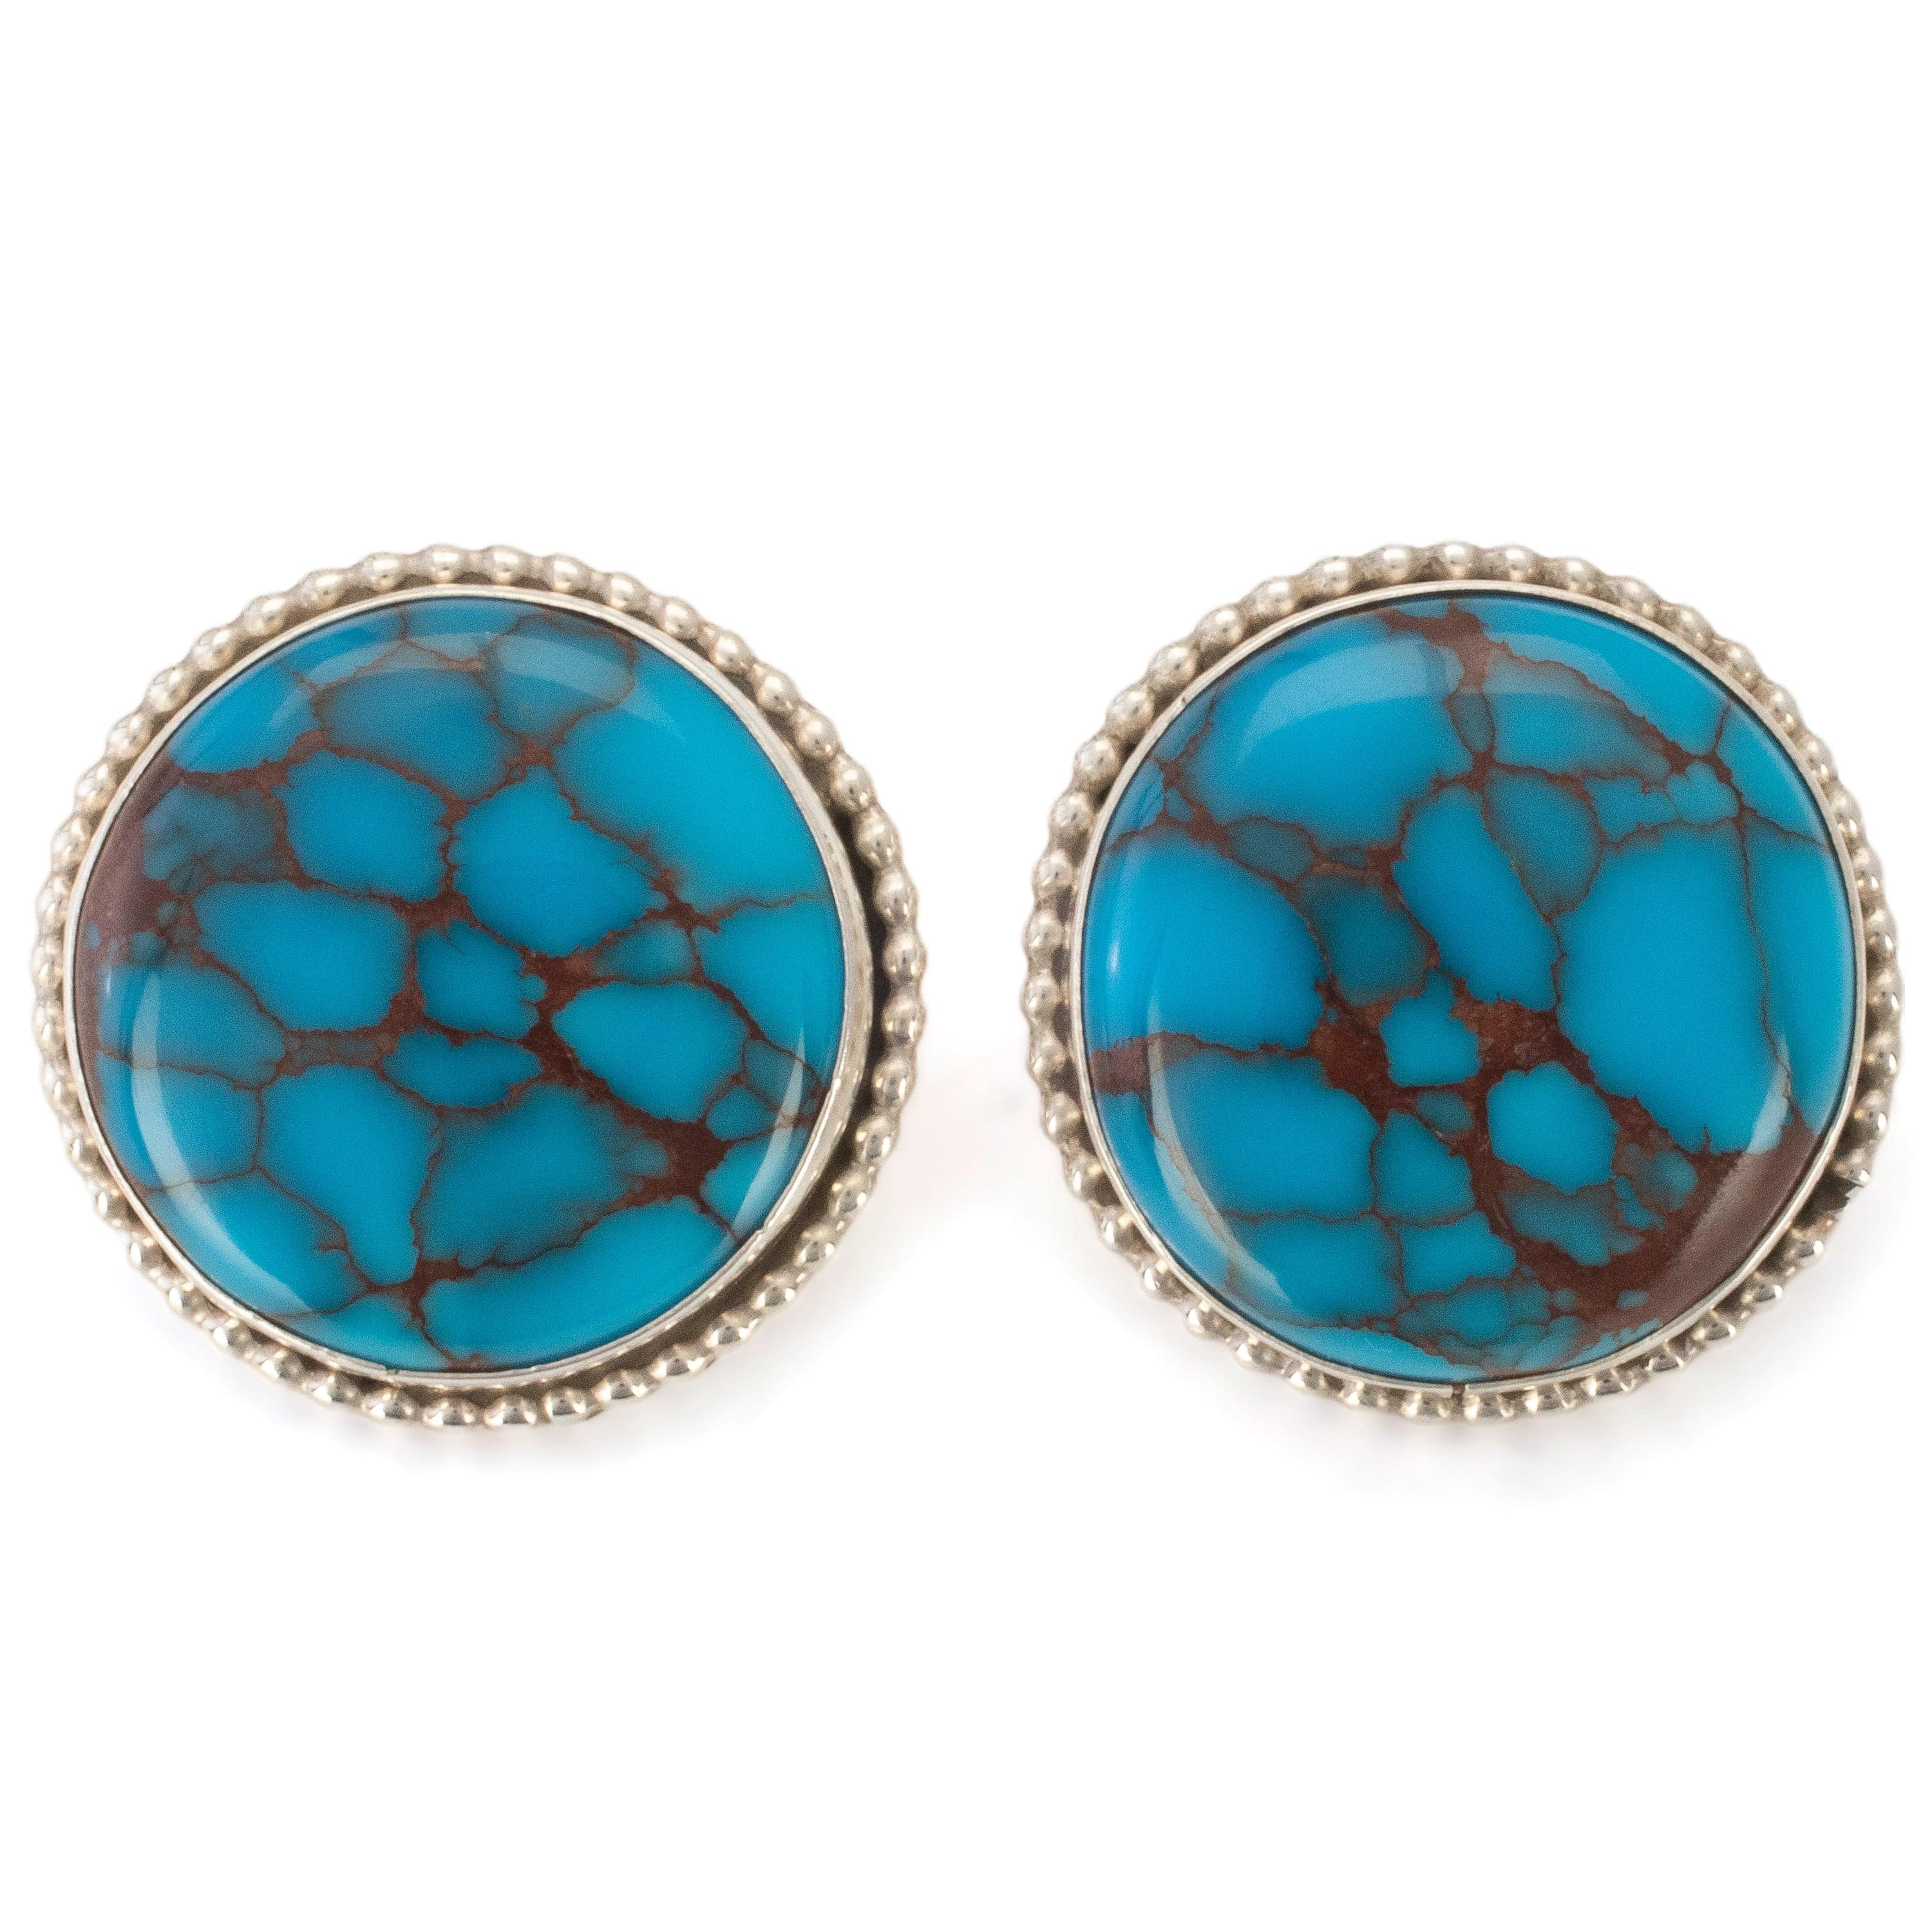 Kalifano Native American Jewelry Art Platero Prince Turquoise Circular USA Native American Made 925 Sterling Silver Earrings with Stud Backing NAE1800.003